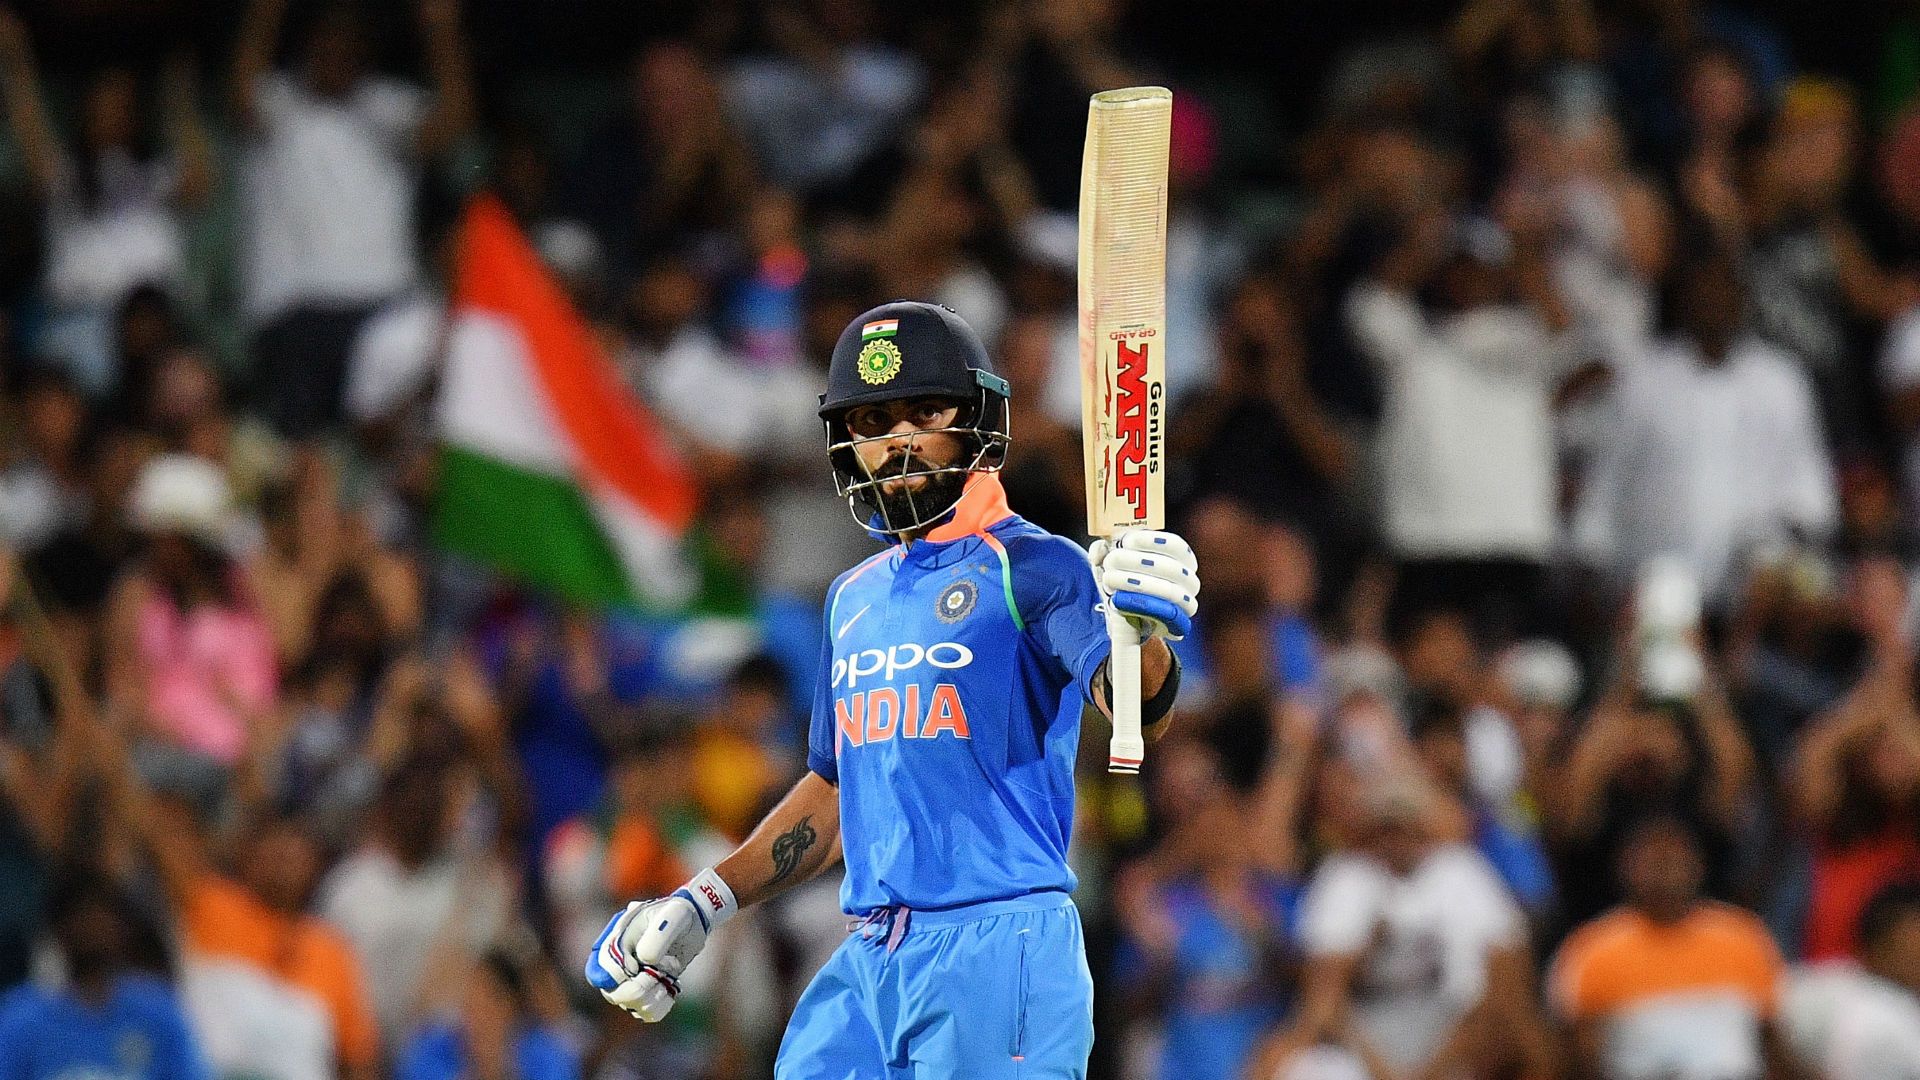 Kohli's creates history in ICC Awards; becomes the first cricketer to win all three awards